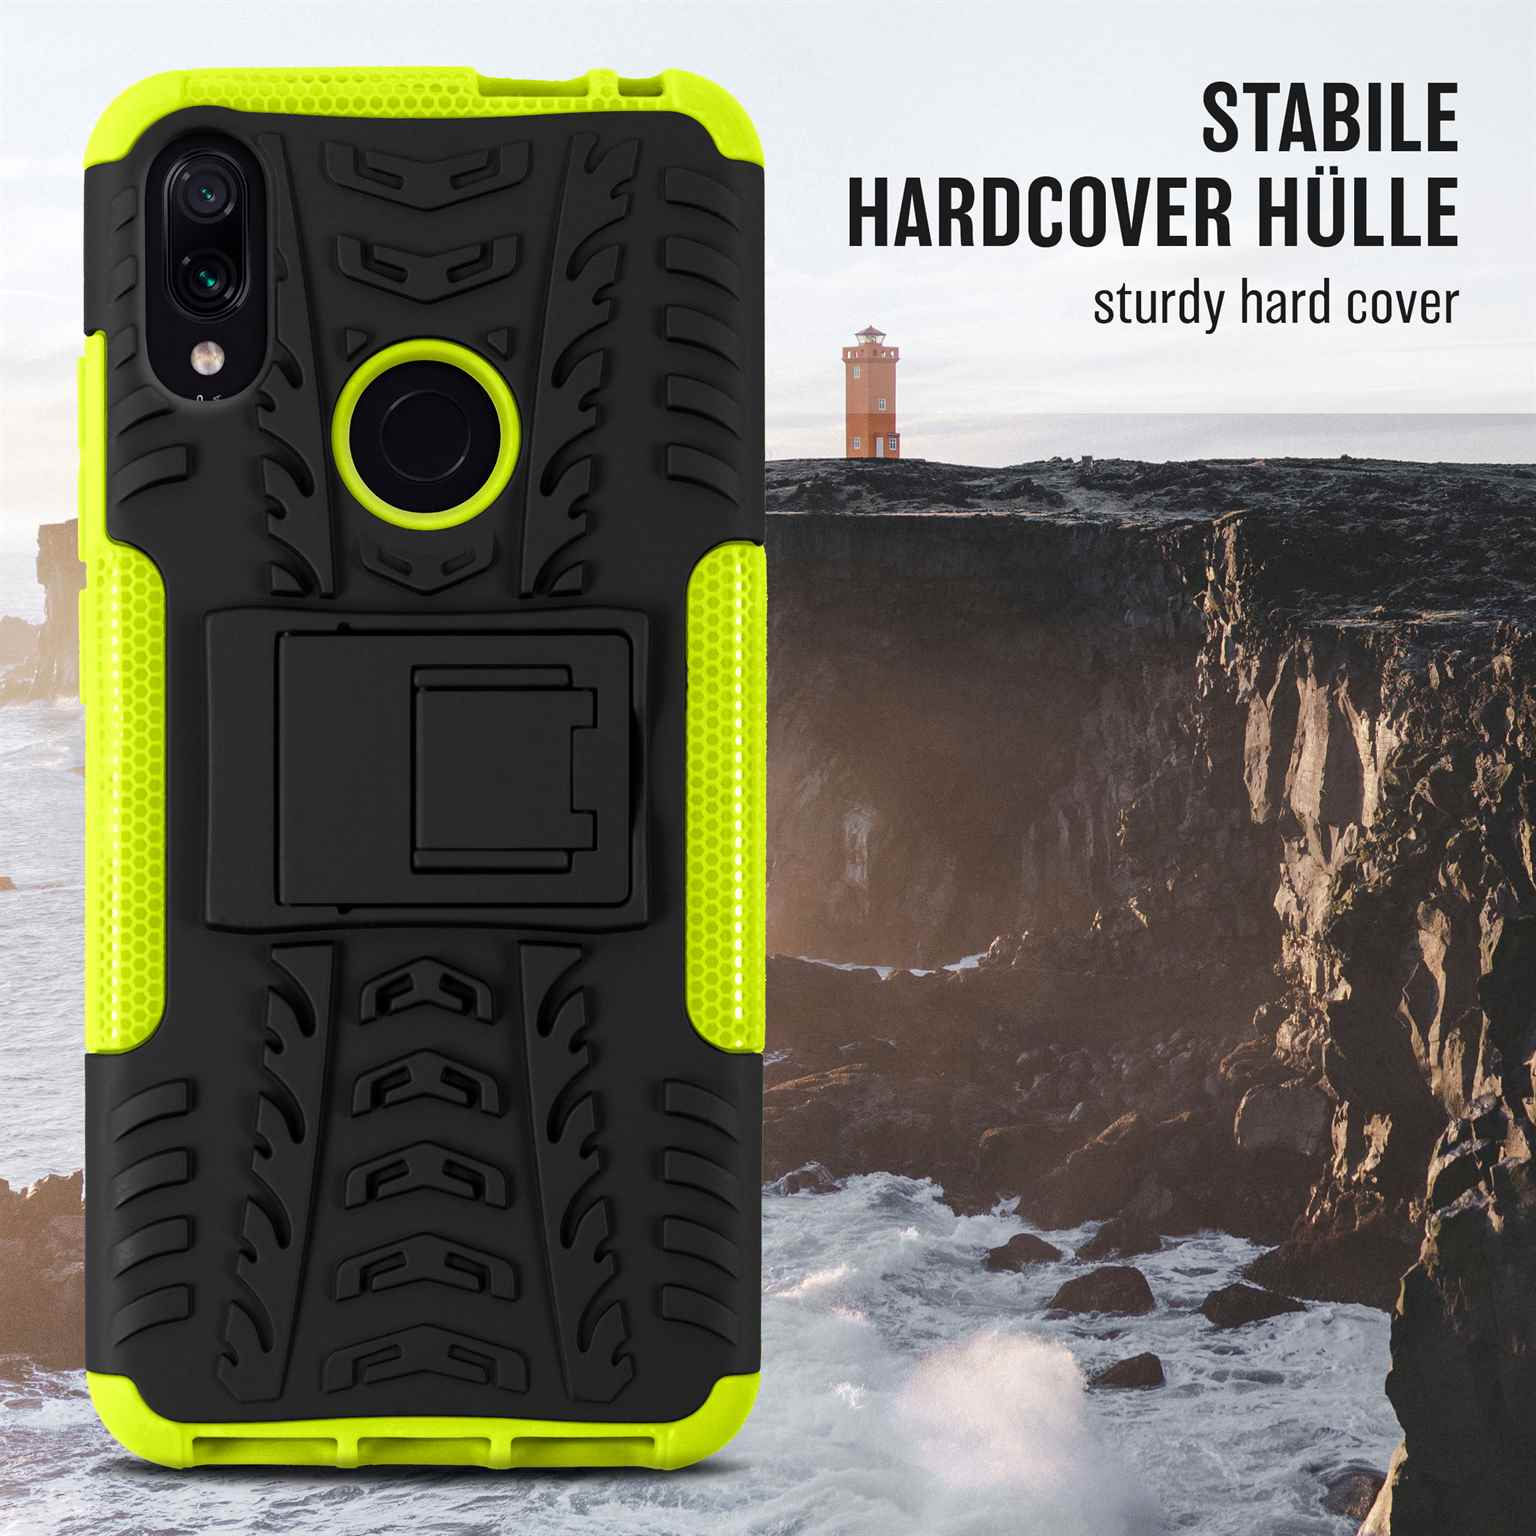 ONEFLOW Tank Case, Backcover, Redmi Xiaomi, Lime 7S, Note